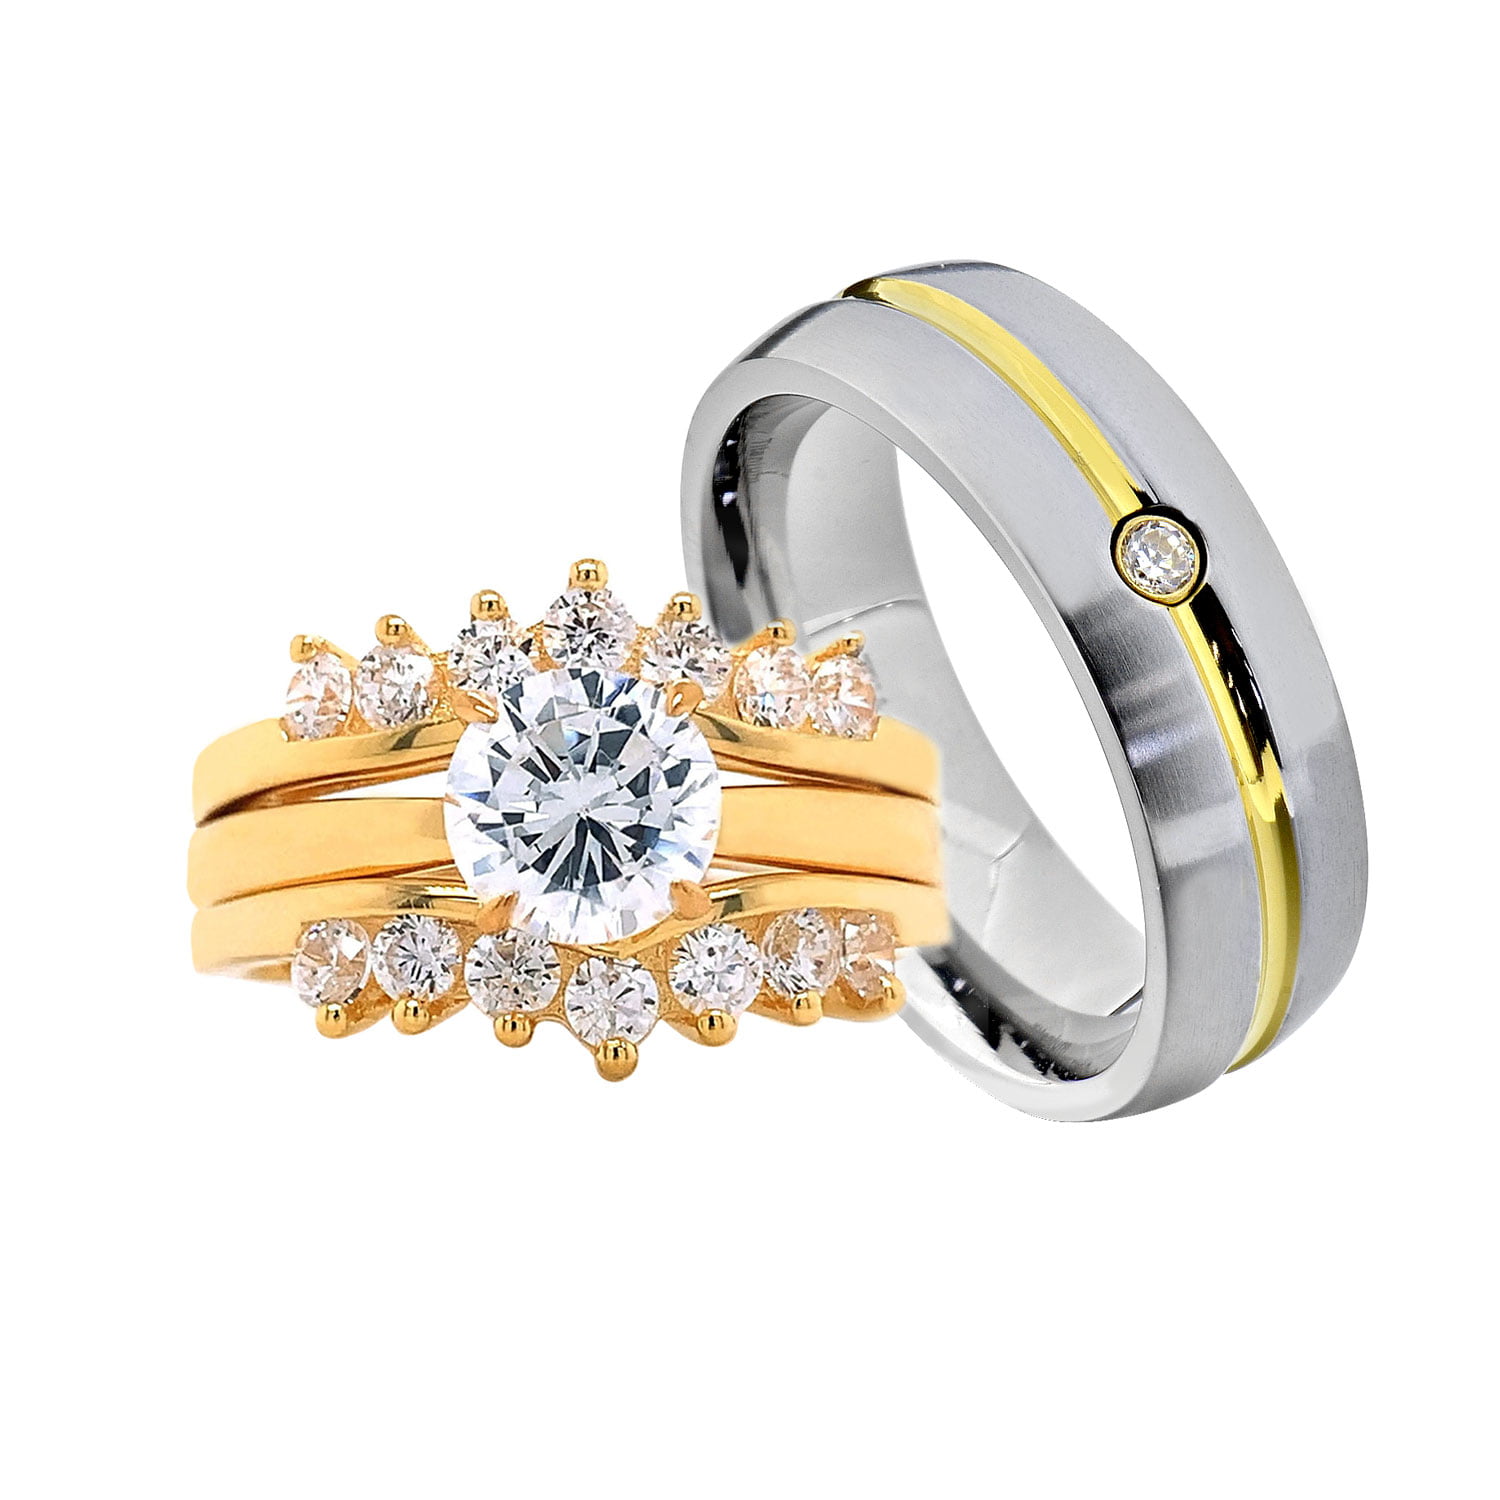 TVS-JEWELS His & Her 3-pc Trio Engagement Wedding Ring Band Set Round Cut White CZ 14k Gold Plated 